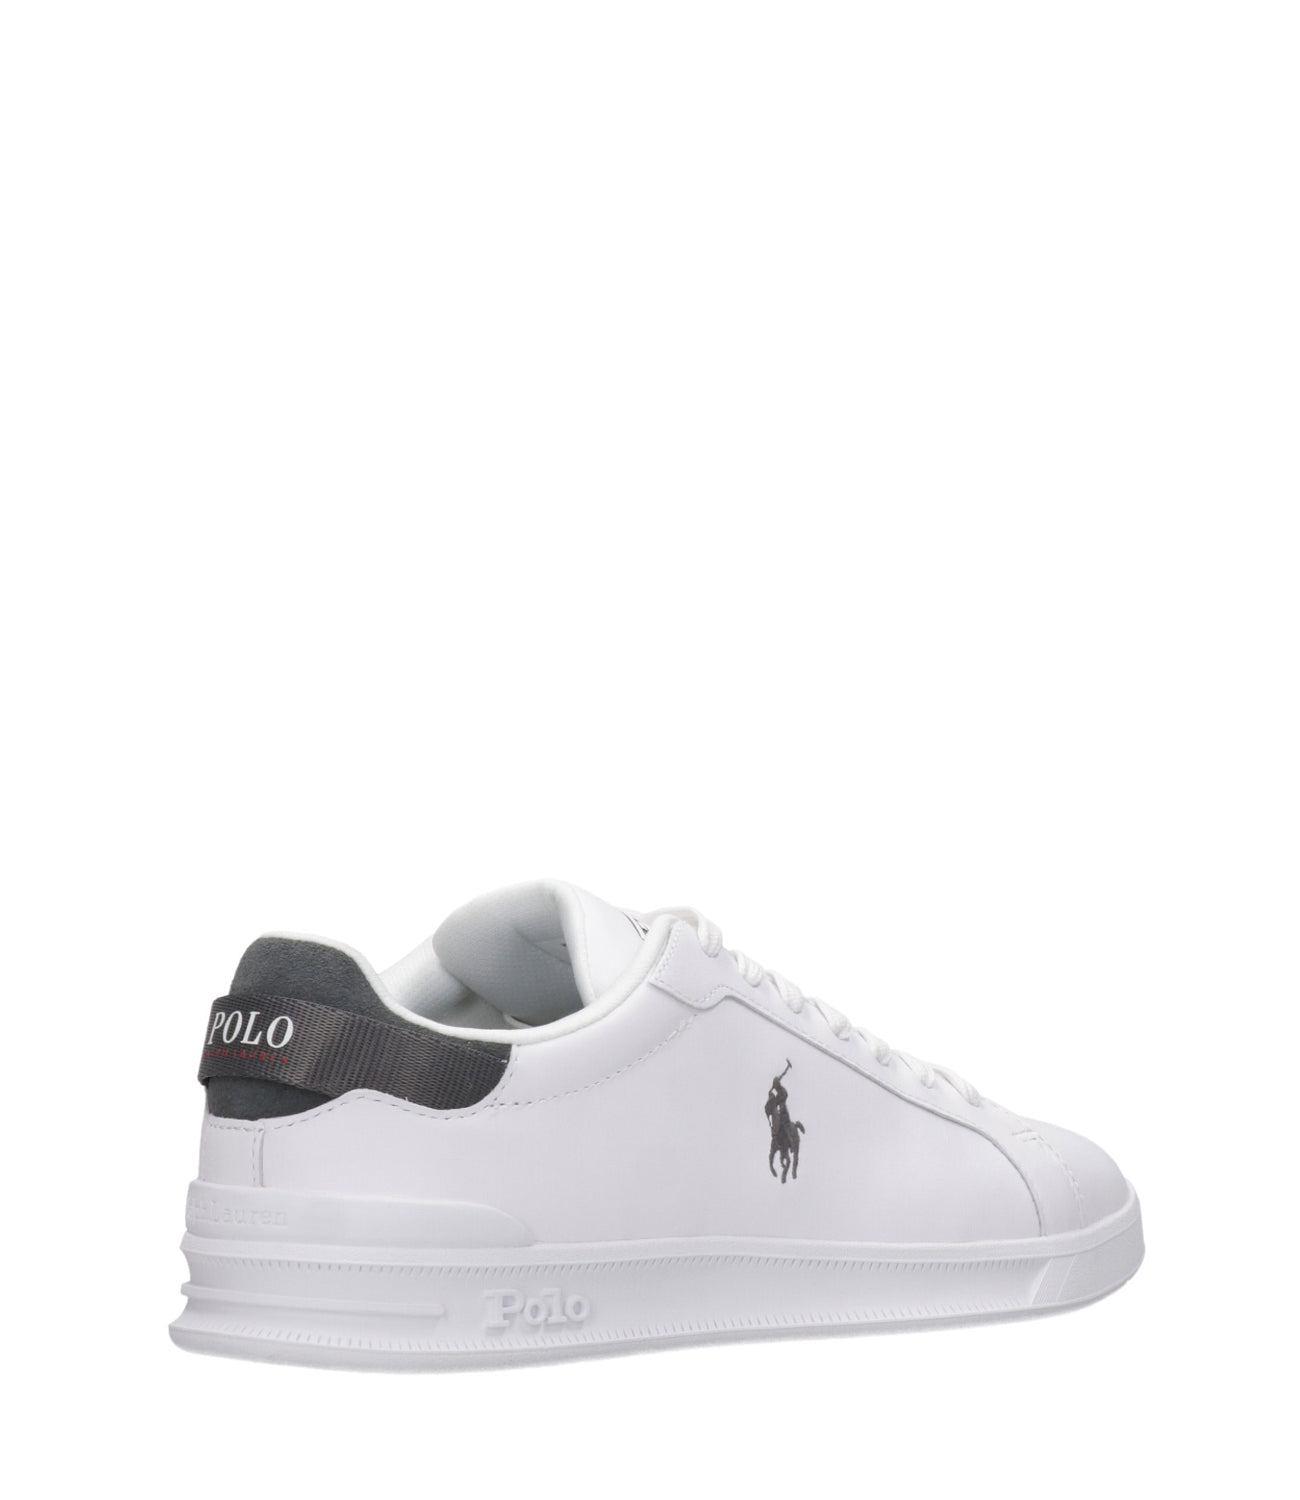 Polo Ralph Lauren | Heritage Court II Sneaker White and Gray